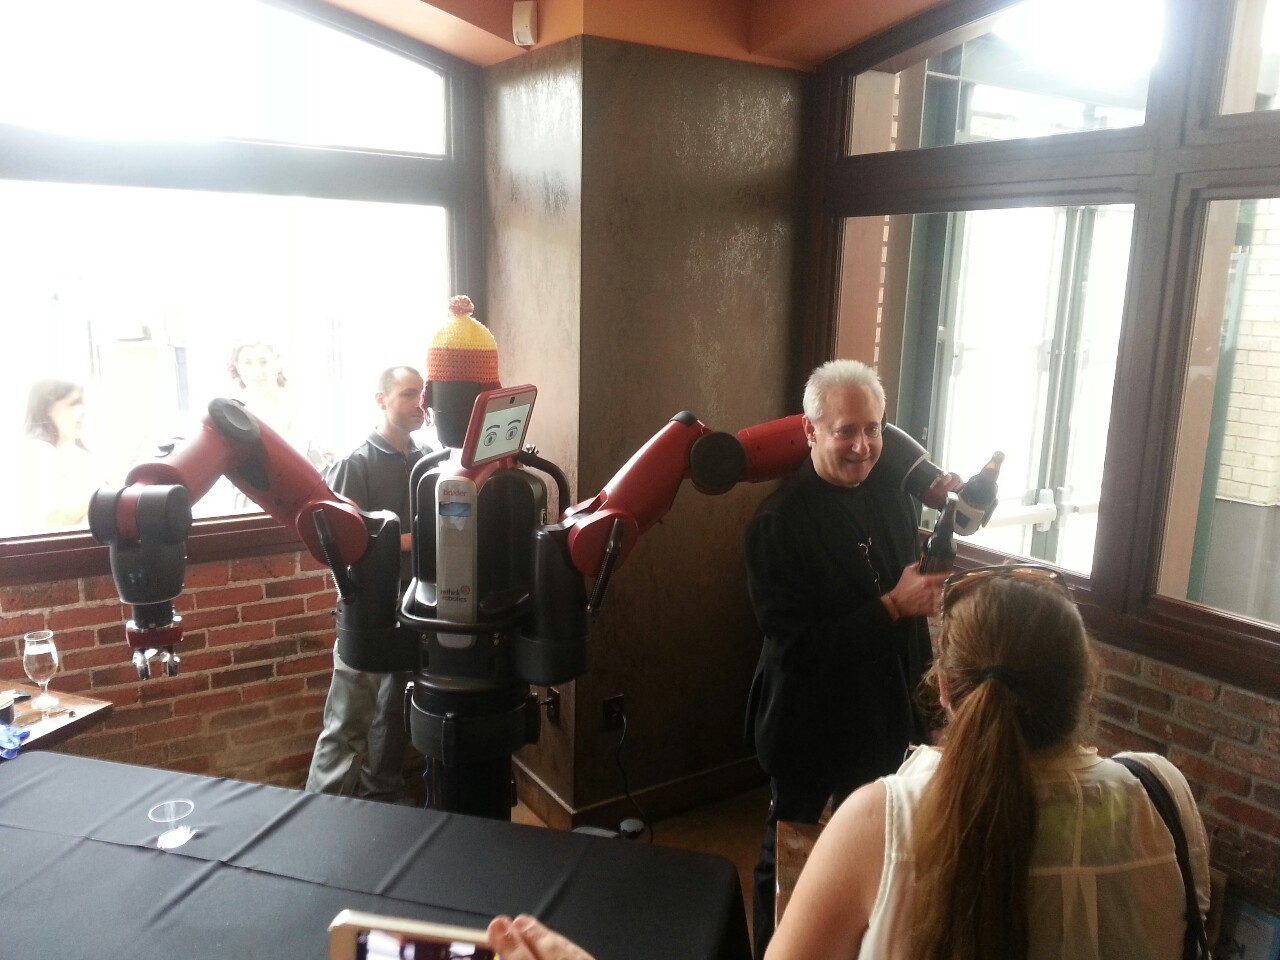 Today I had a Stone beer, poured by a robot, and enjoyed it with my favorite robot